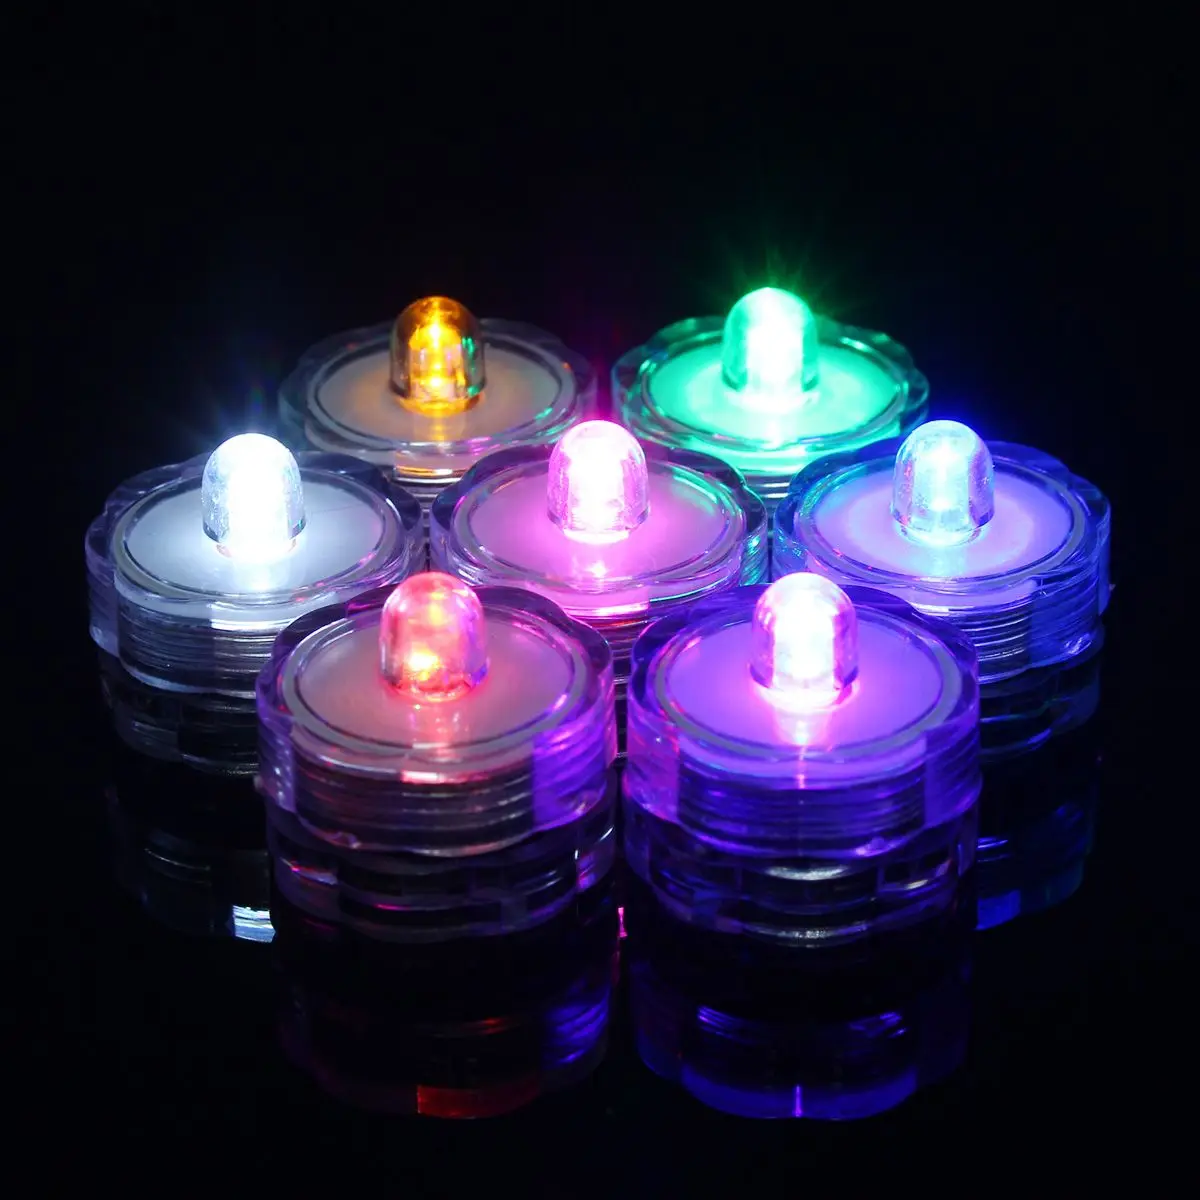 100 Light Up Tea Lights LED Candles Submersible Waterproof Wedding Party Vase 